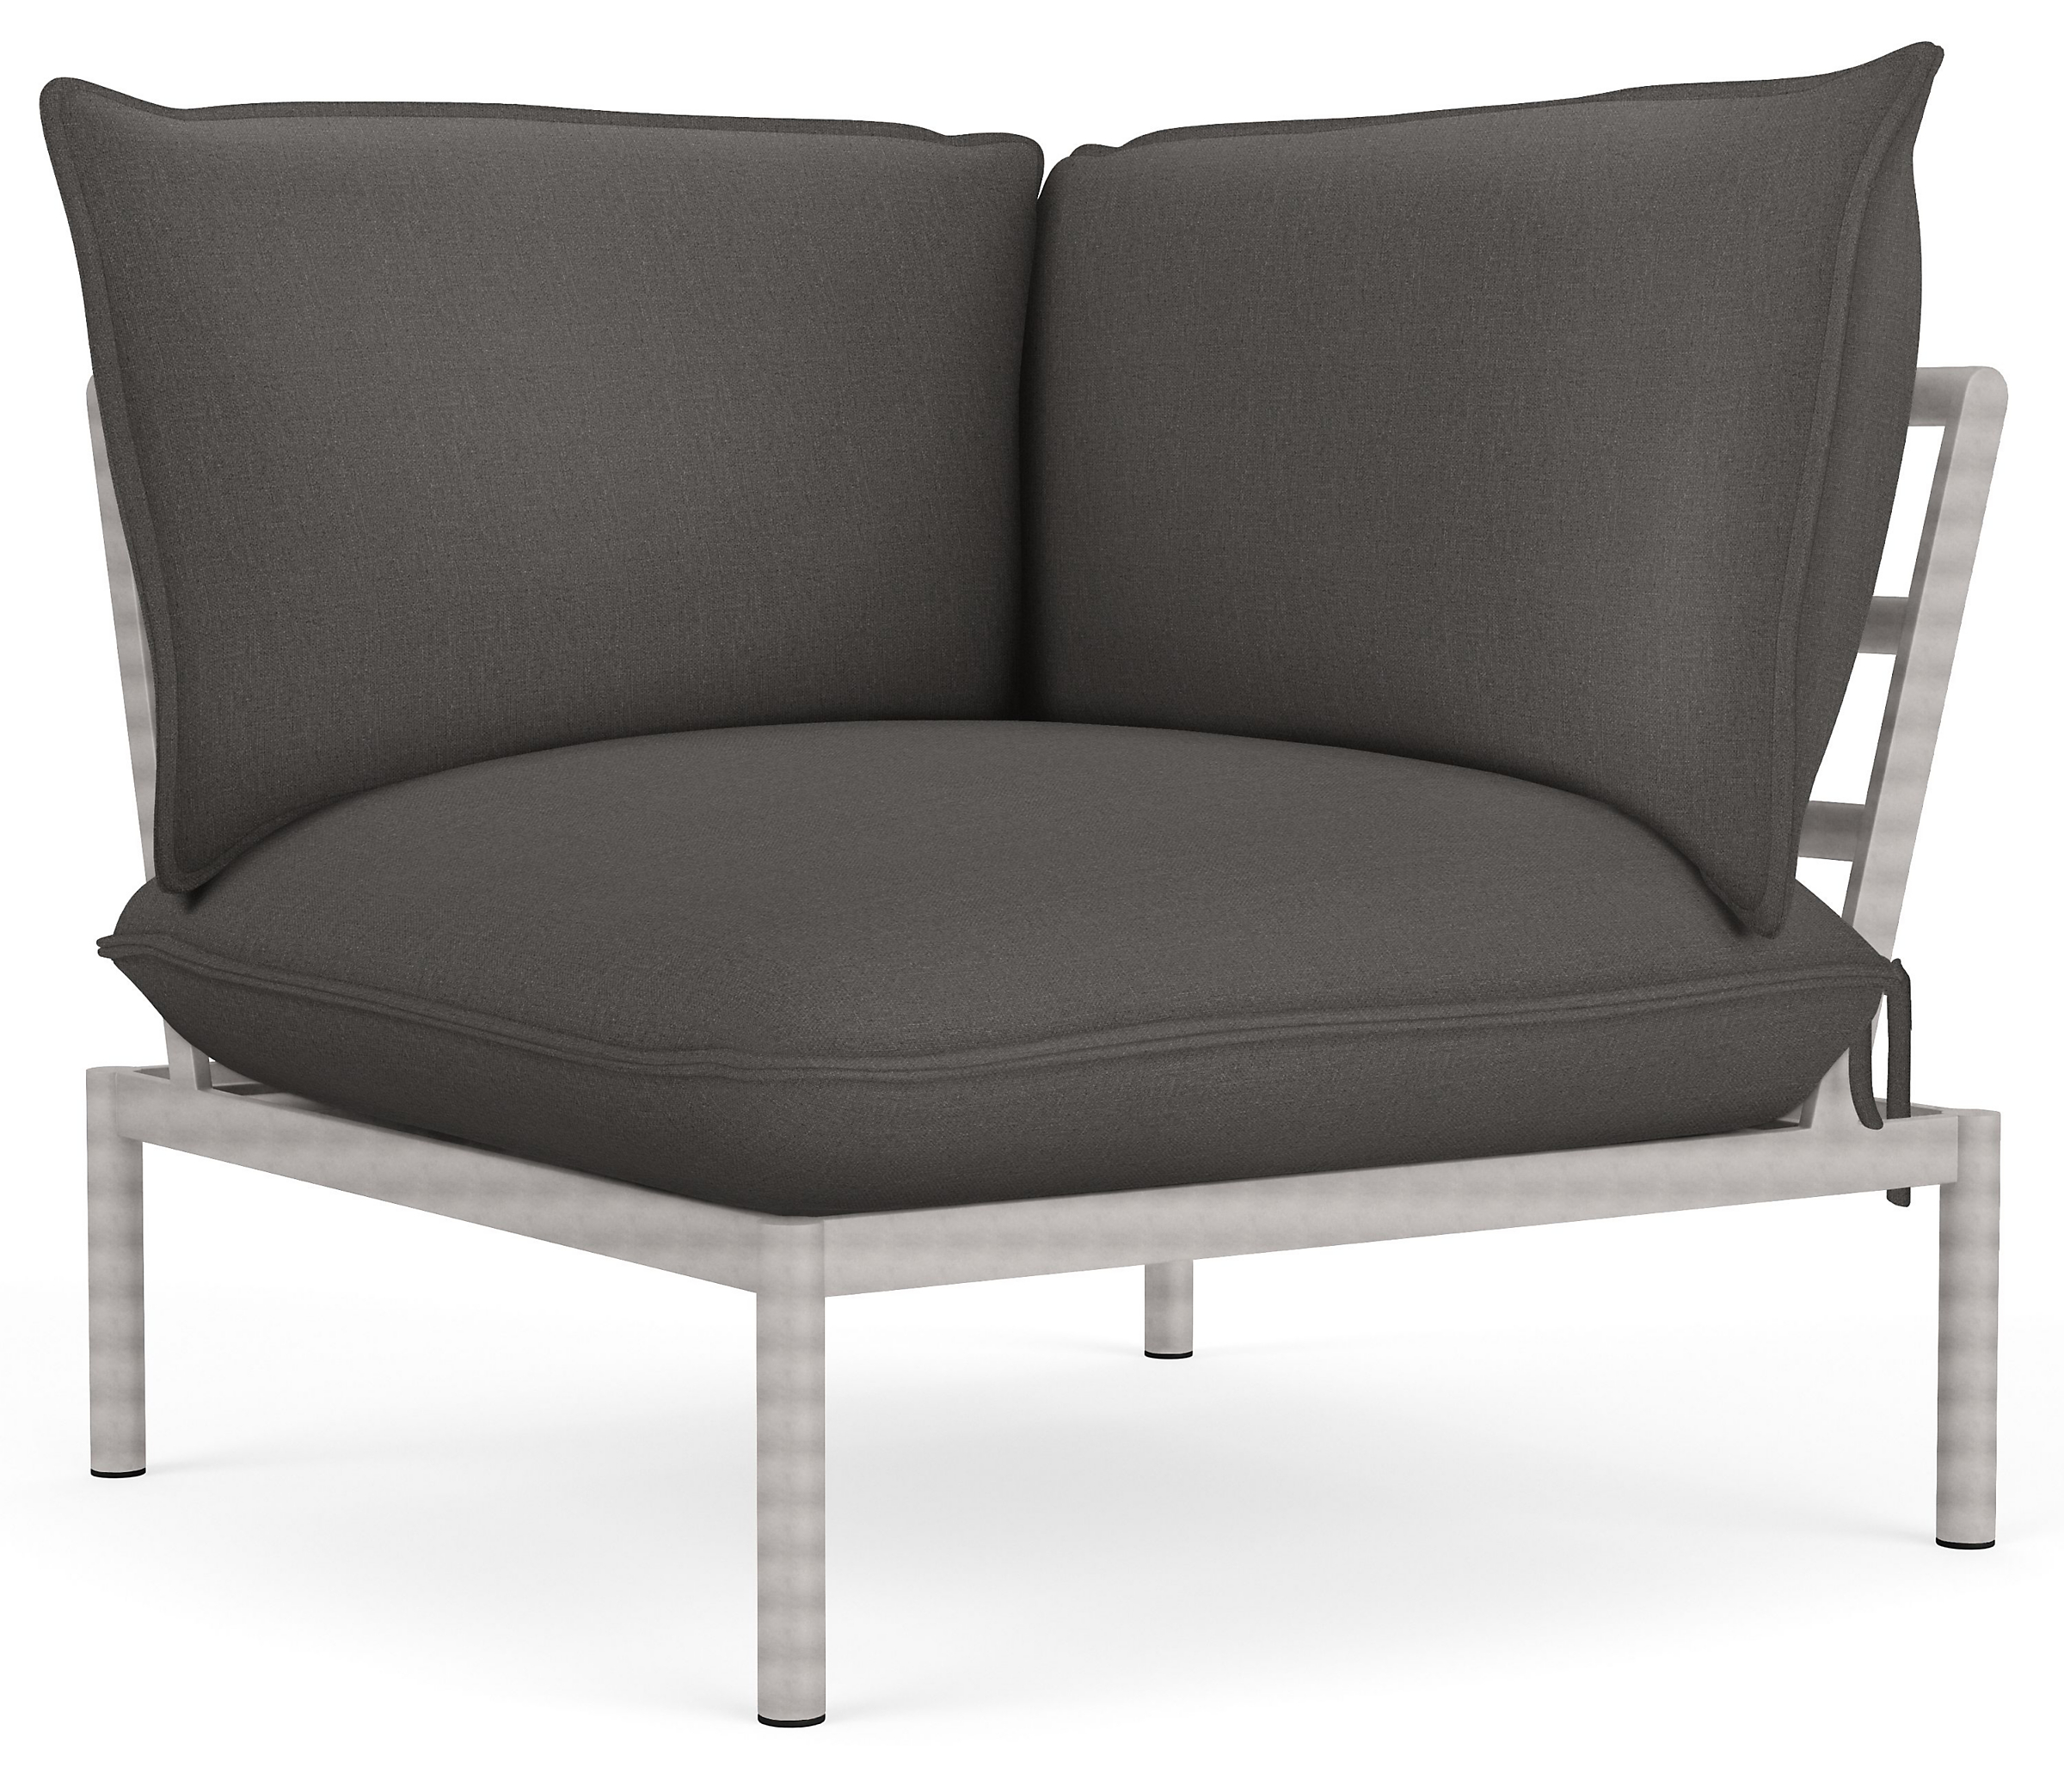 Westbrook Corner in Mist Charcoal with Stainless Steel Frame